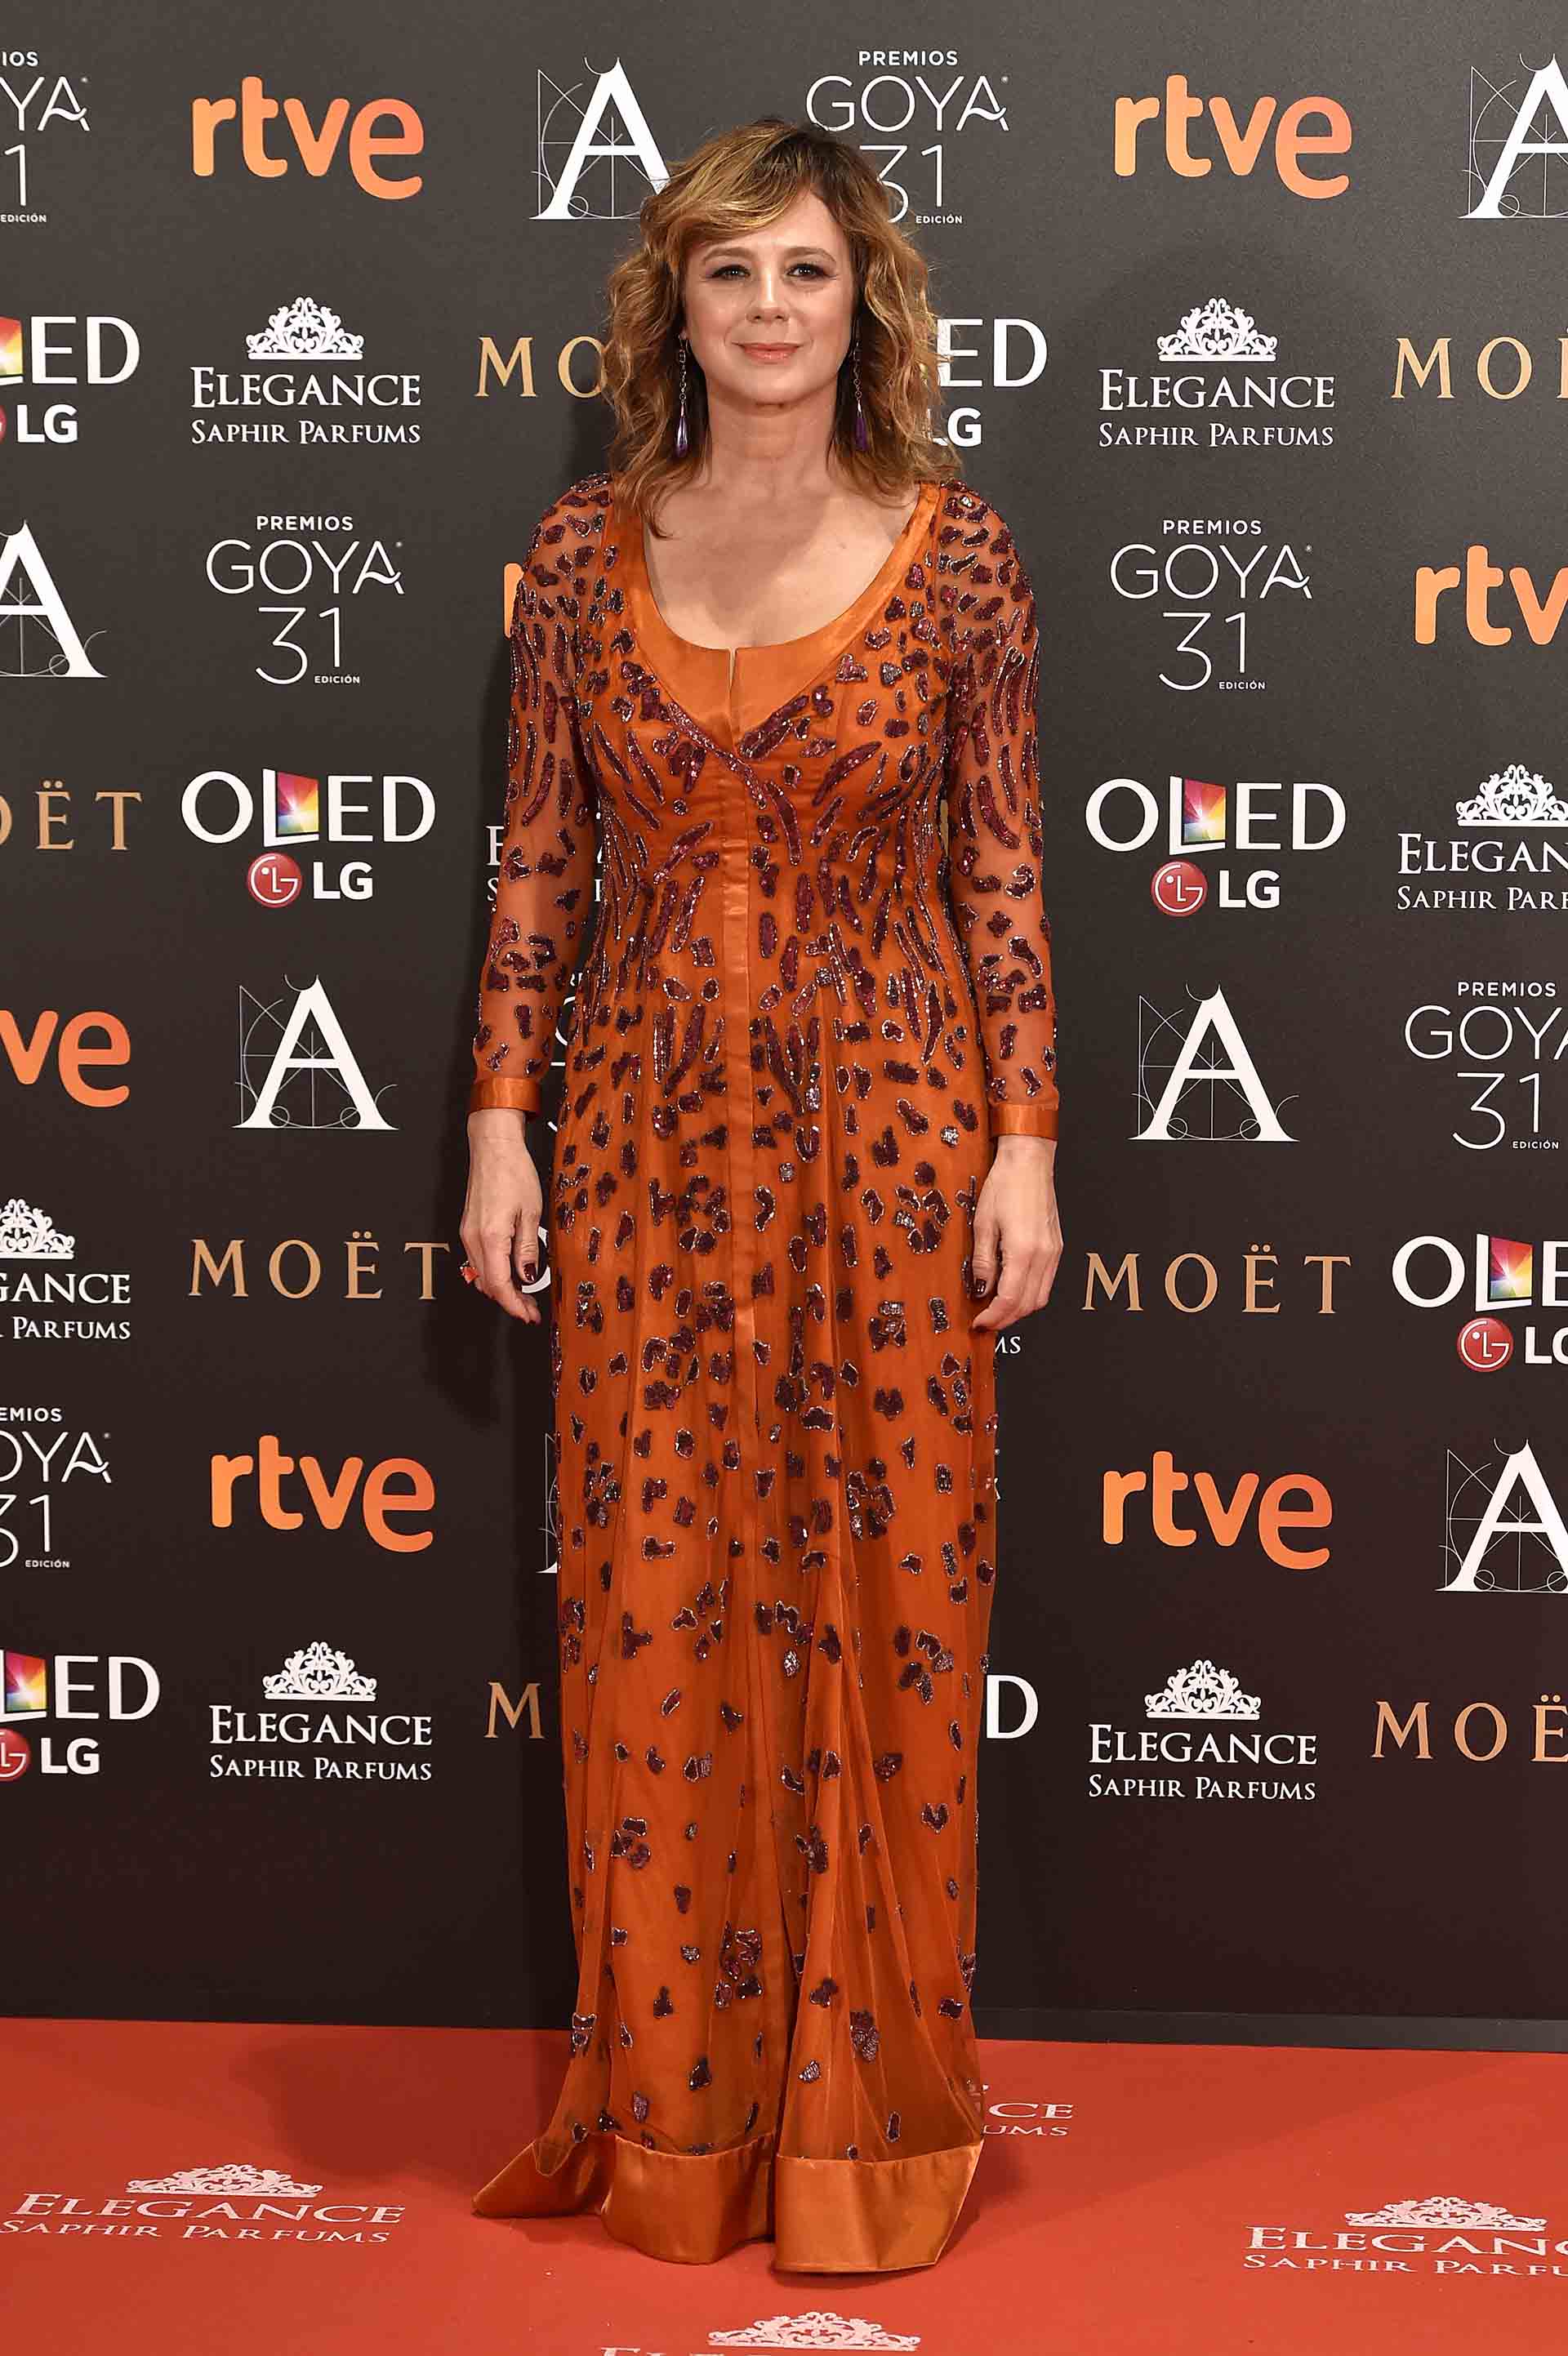 Actress Emma Suarez at photocall during the 31th annual Goya Film Awards in Madrid, on Saturday 4th February, 2017.